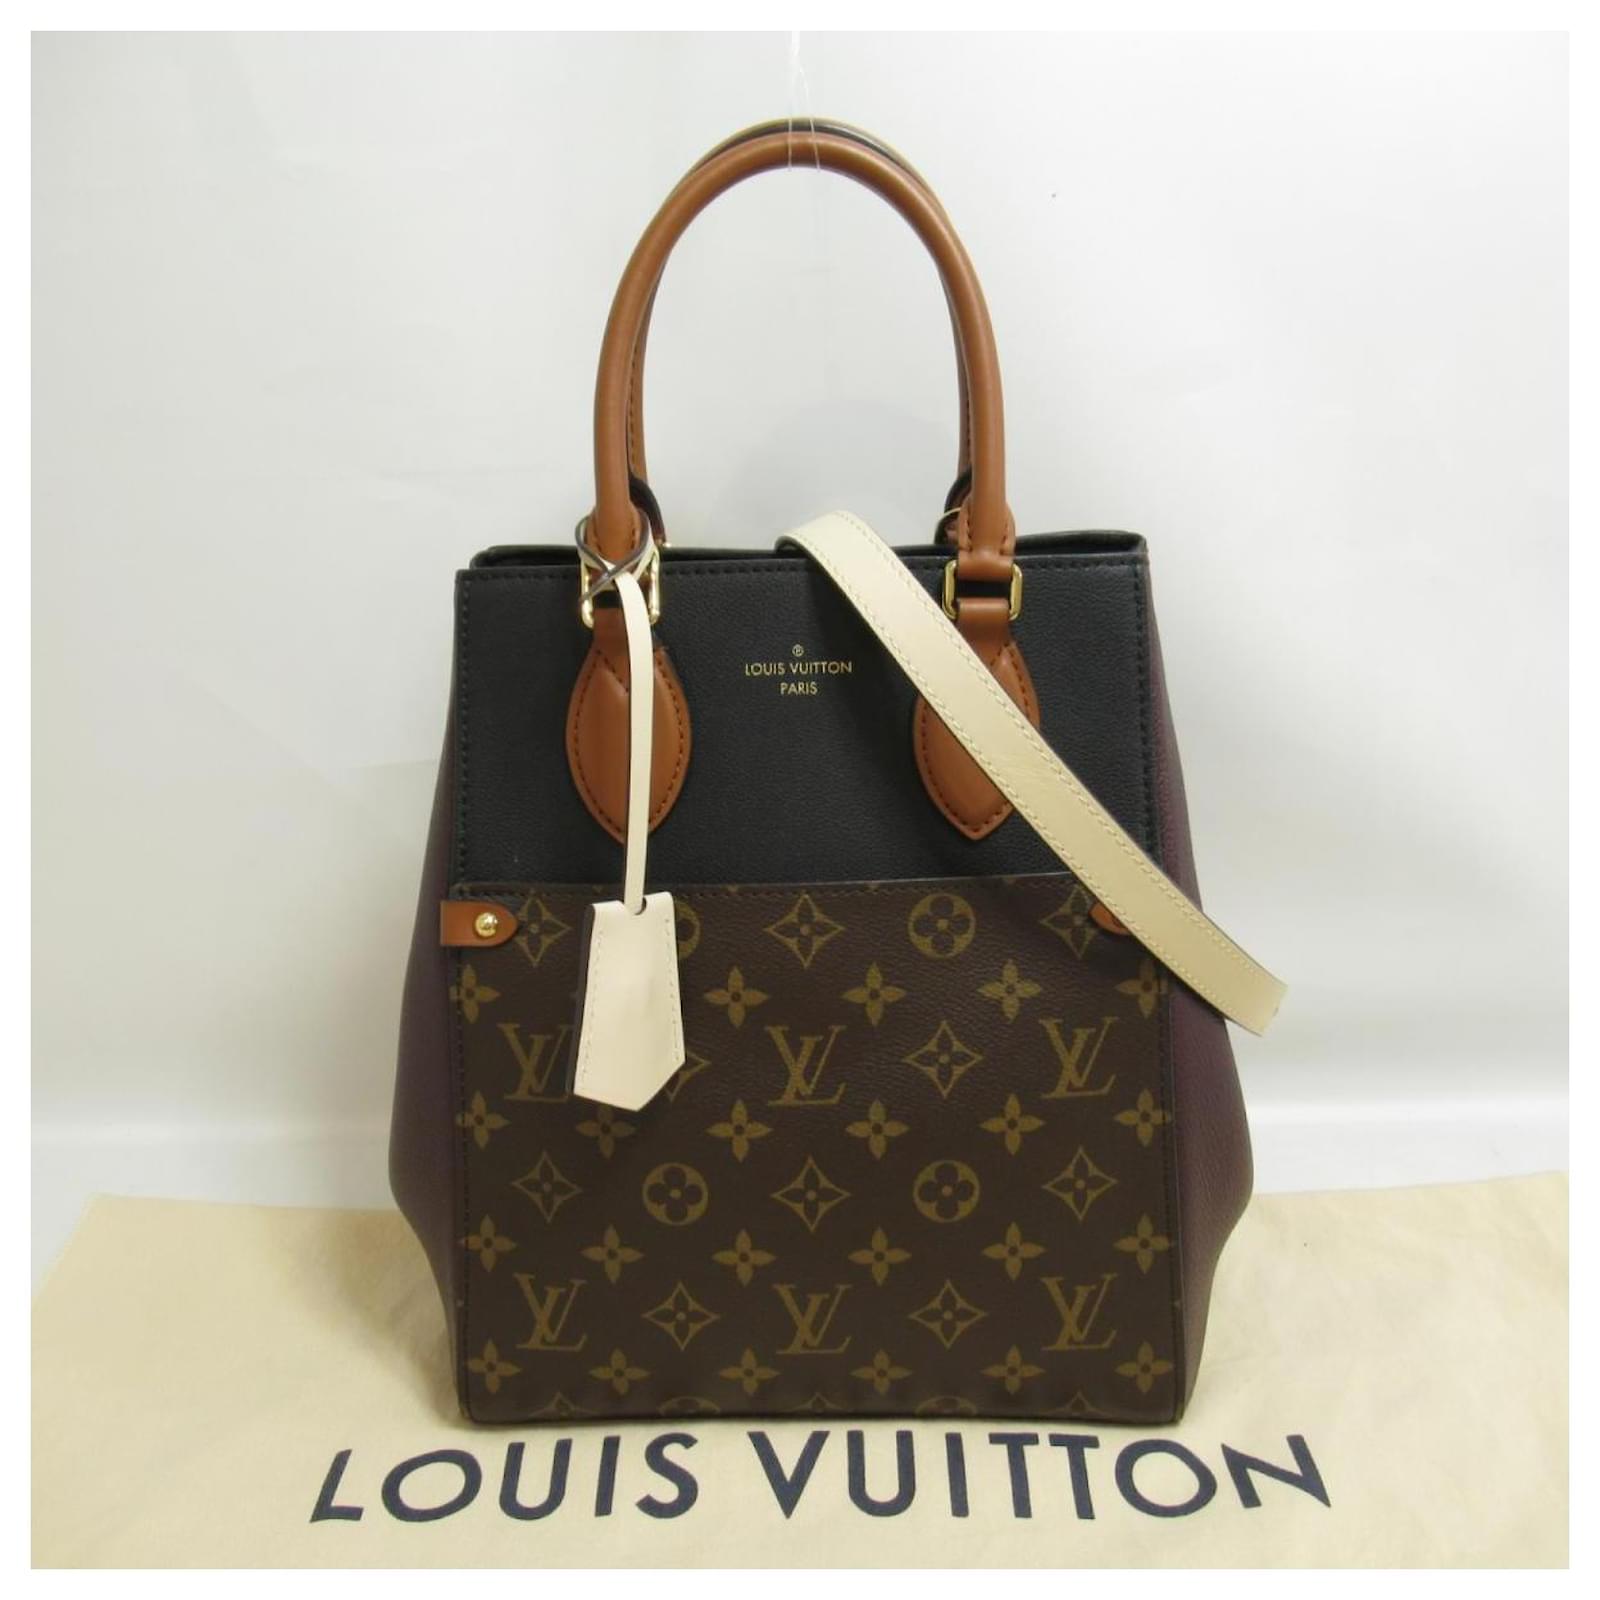 Fold Tote Monogram Canvas and Leather MM